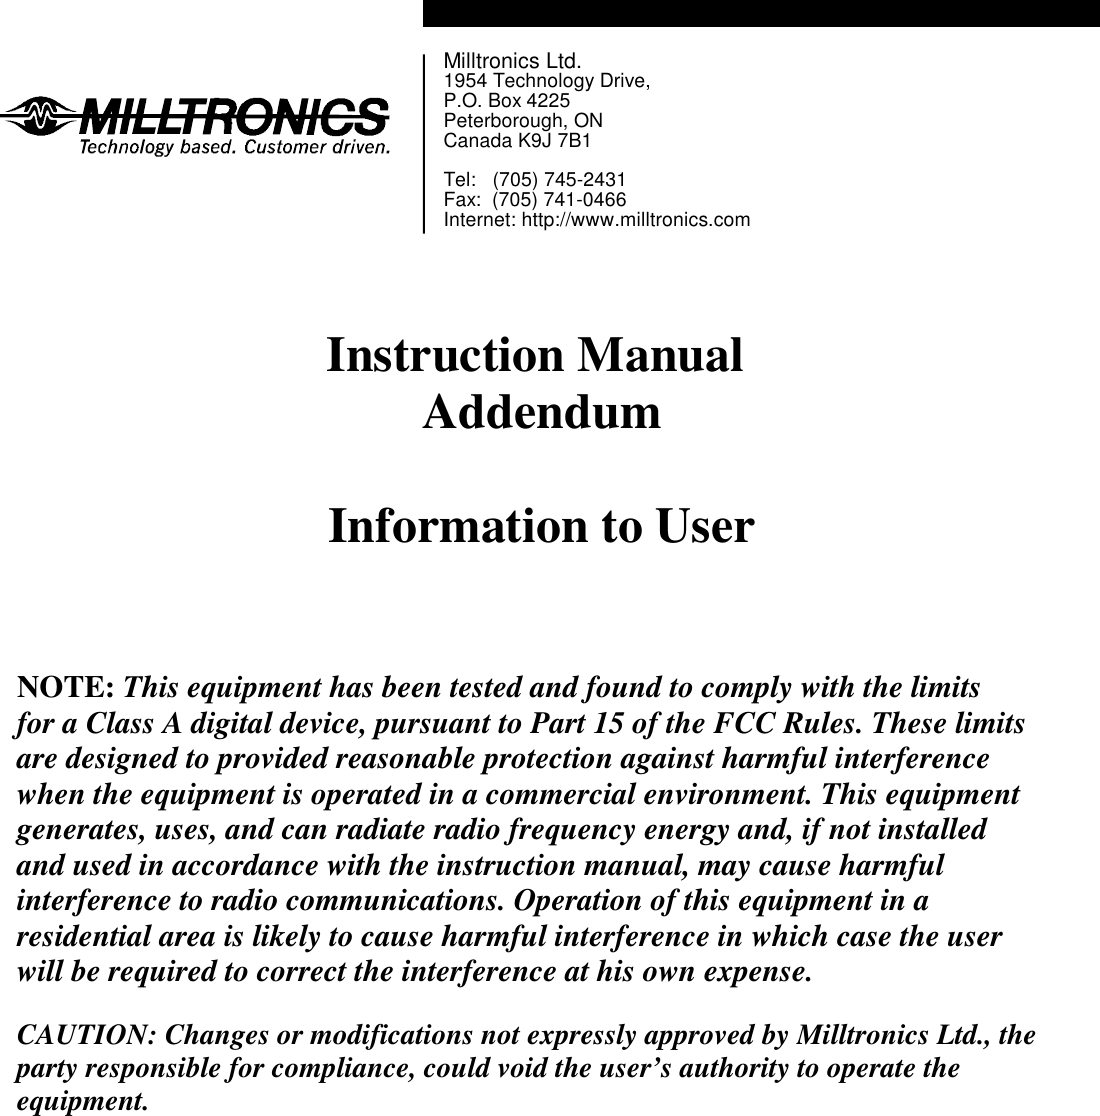 Milltronics Ltd.1954 Technology Drive,P.O. Box 4225Peterborough, ONCanada K9J 7B1Tel:   (705) 745-2431Fax:  (705) 741-0466Internet: http://www.milltronics.comInstruction Manual AddendumInformation to UserNOTE: This equipment has been tested and found to comply with the limitsfor a Class A digital device, pursuant to Part 15 of the FCC Rules. These limitsare designed to provided reasonable protection against harmful interferencewhen the equipment is operated in a commercial environment. This equipmentgenerates, uses, and can radiate radio frequency energy and, if not installedand used in accordance with the instruction manual, may cause harmfulinterference to radio communications. Operation of this equipment in aresidential area is likely to cause harmful interference in which case the userwill be required to correct the interference at his own expense.CAUTION: Changes or modifications not expressly approved by Milltronics Ltd., theparty responsible for compliance, could void the user’s authority to operate theequipment.